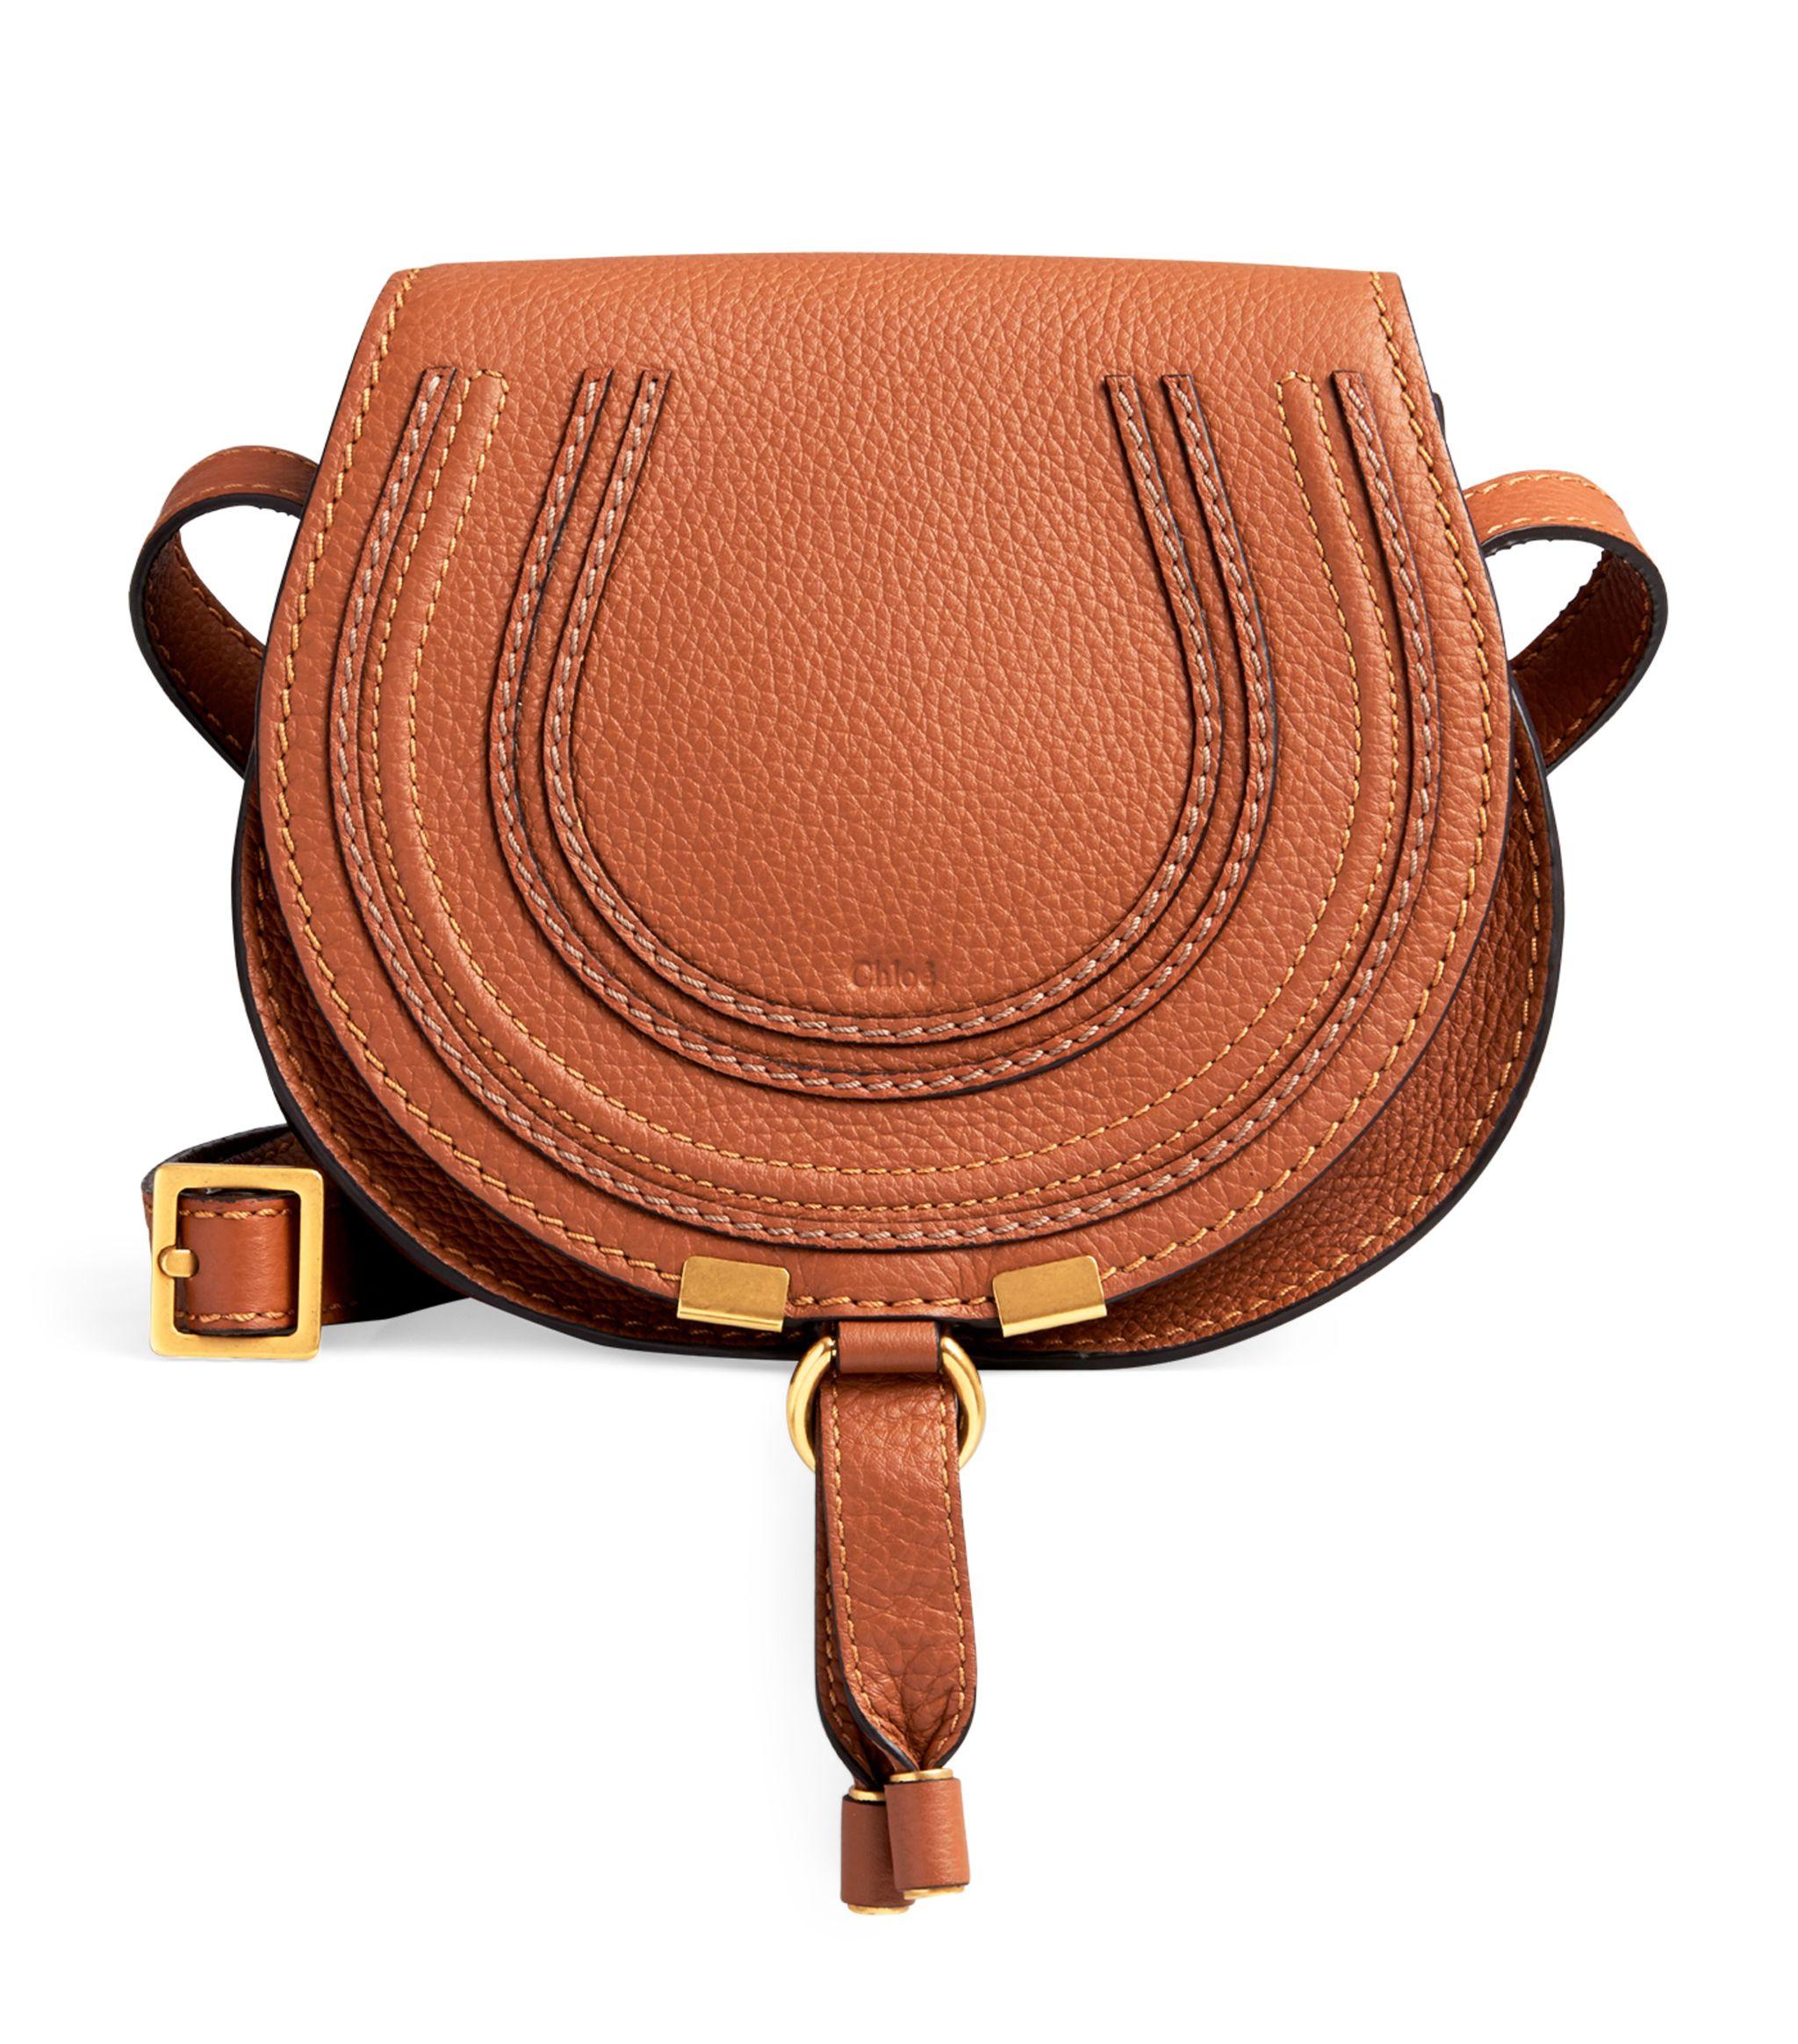 Chloé Marcie Mini Leather Saddle Bag in Brown - Save 32% - Lyst